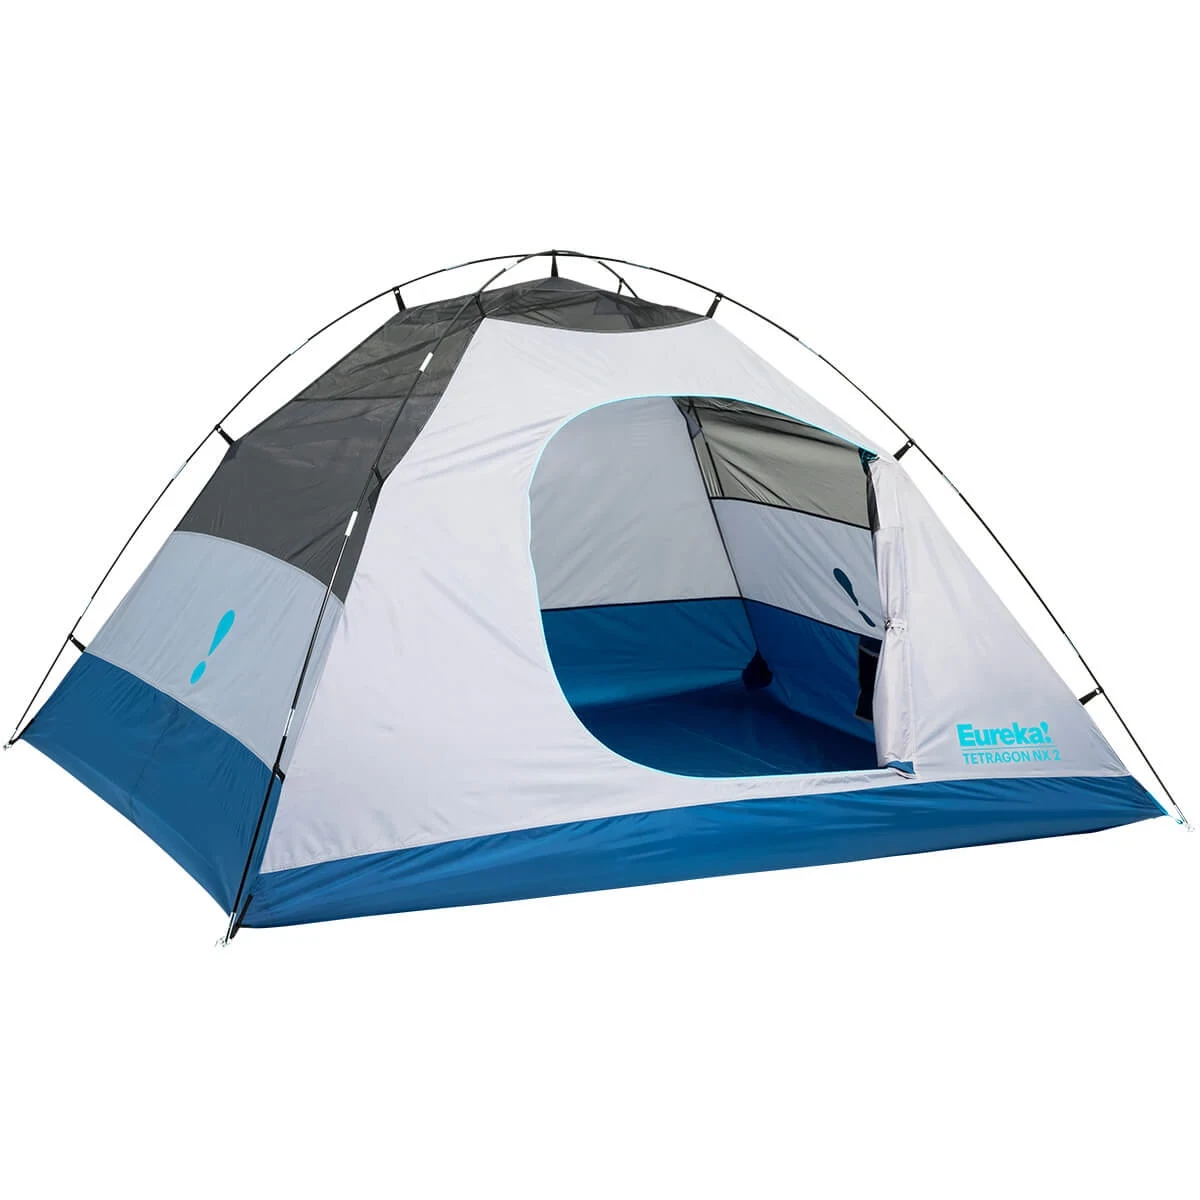 Tetragon NX 2 person tent rainfly off with door open